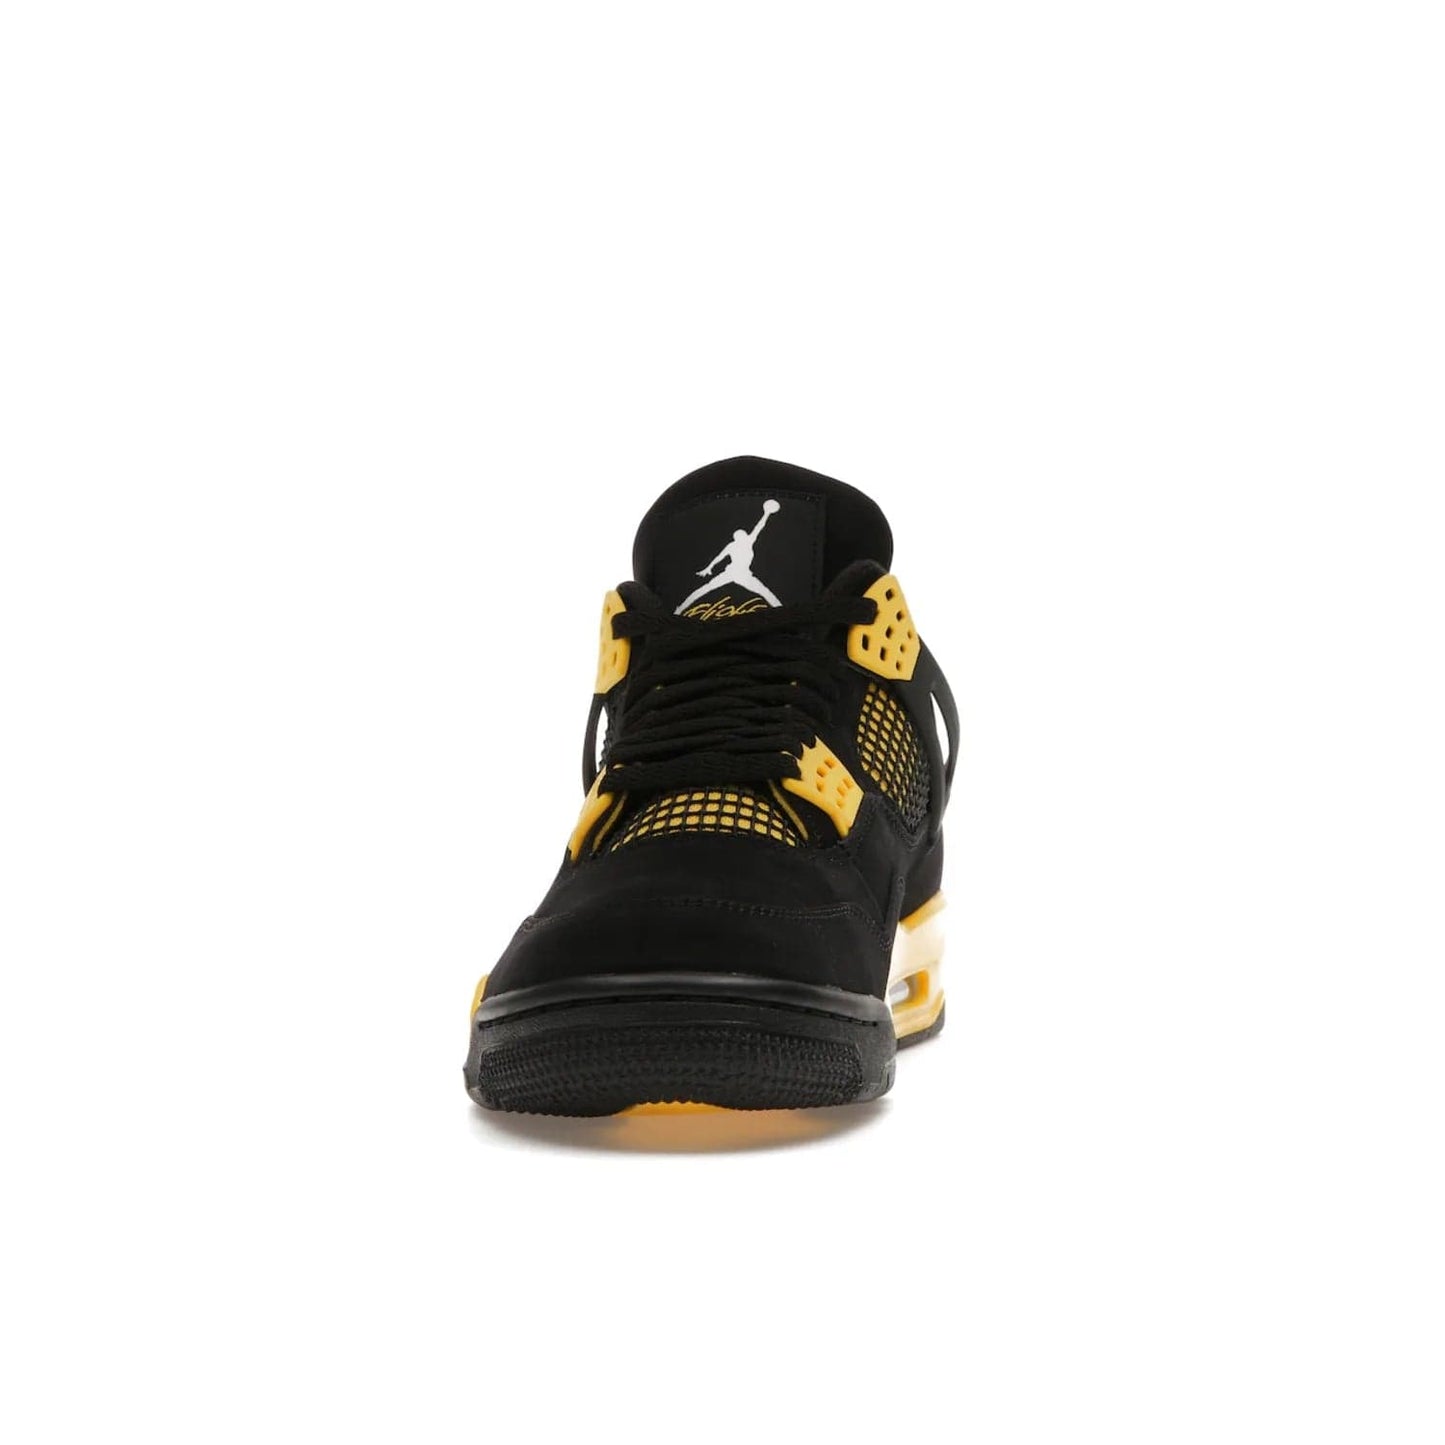 Jordan 4 Retro Thunder (2023) - Image 11 - Only at www.BallersClubKickz.com - Iconic Air Jordan 4 Retro Thunder (2023) returns with black nubuck upper and Tour Yellow details. Featuring Jumpman logo on heel tab, tongue and insoles. Dropping May 13th, 2023.